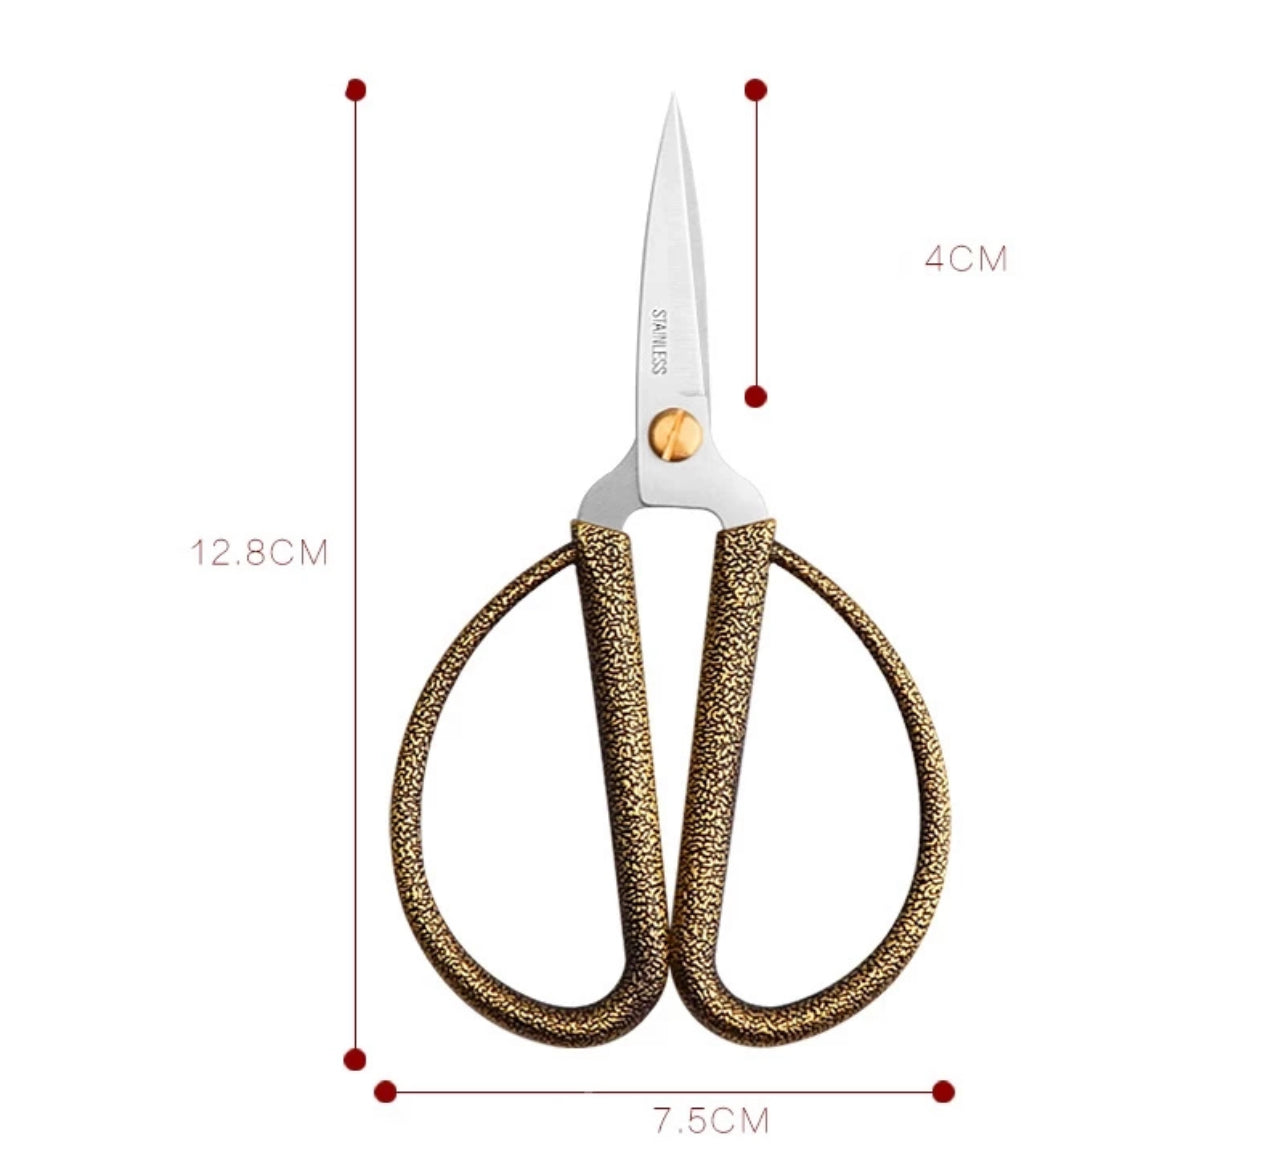 Brass Handle Thread Snips Available in 3 Sizes